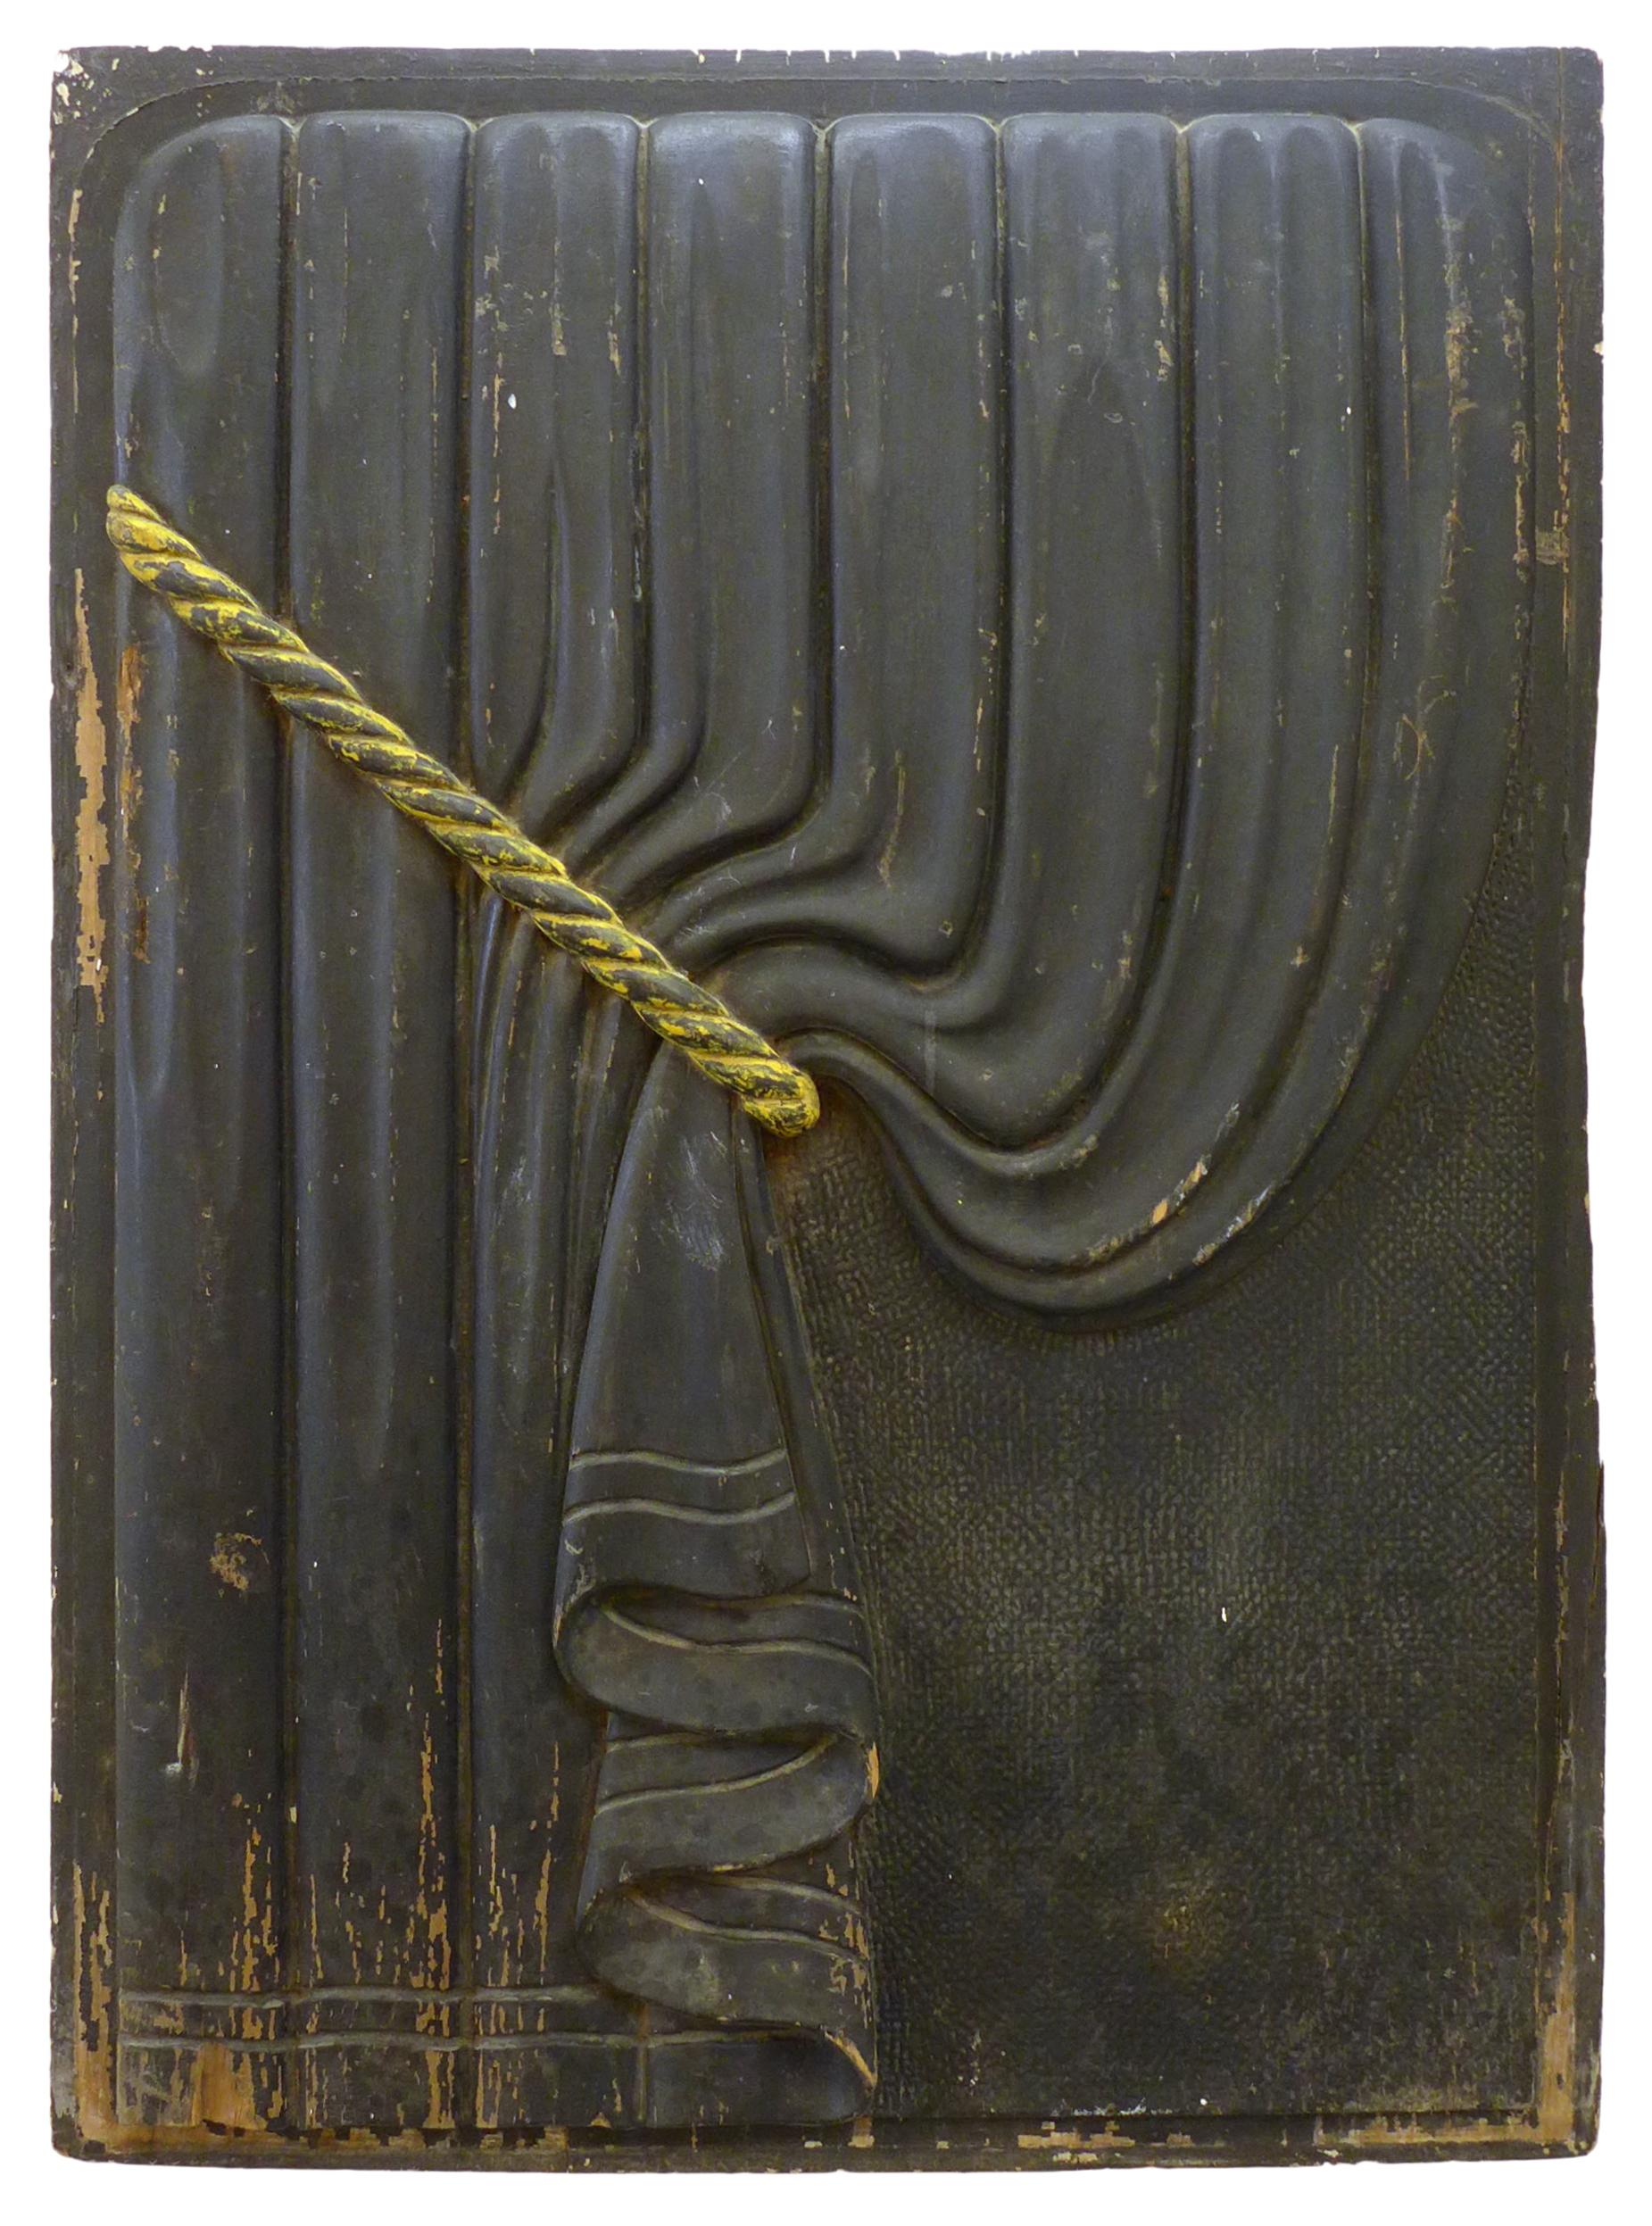 A wonderful pair of early 20th century, carved wood, funeral-coach curtain panels. A mirror-matched pair of matte black, bas-relief curtains with contrasting, gilt rope tiebacks. These sorts of panels were traditionally used as symbolic trompe